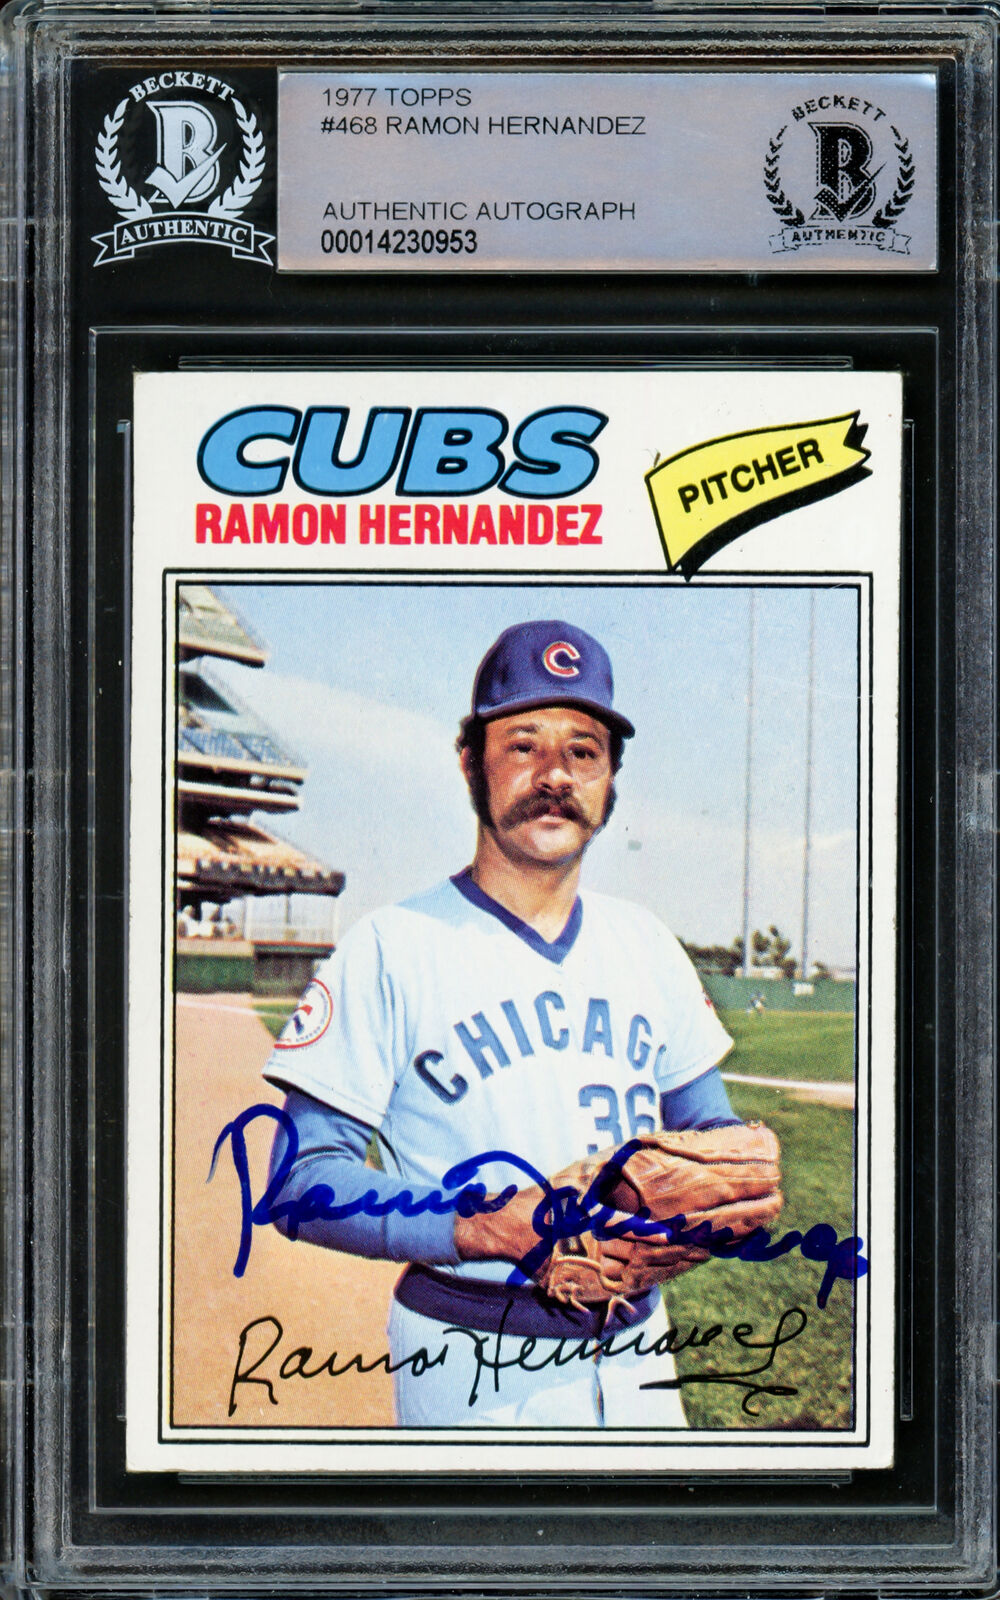 Ramon Hernandez Autographed 1977 Topps Card #468 Chicago Cubs Beckett #14230953 Image 1